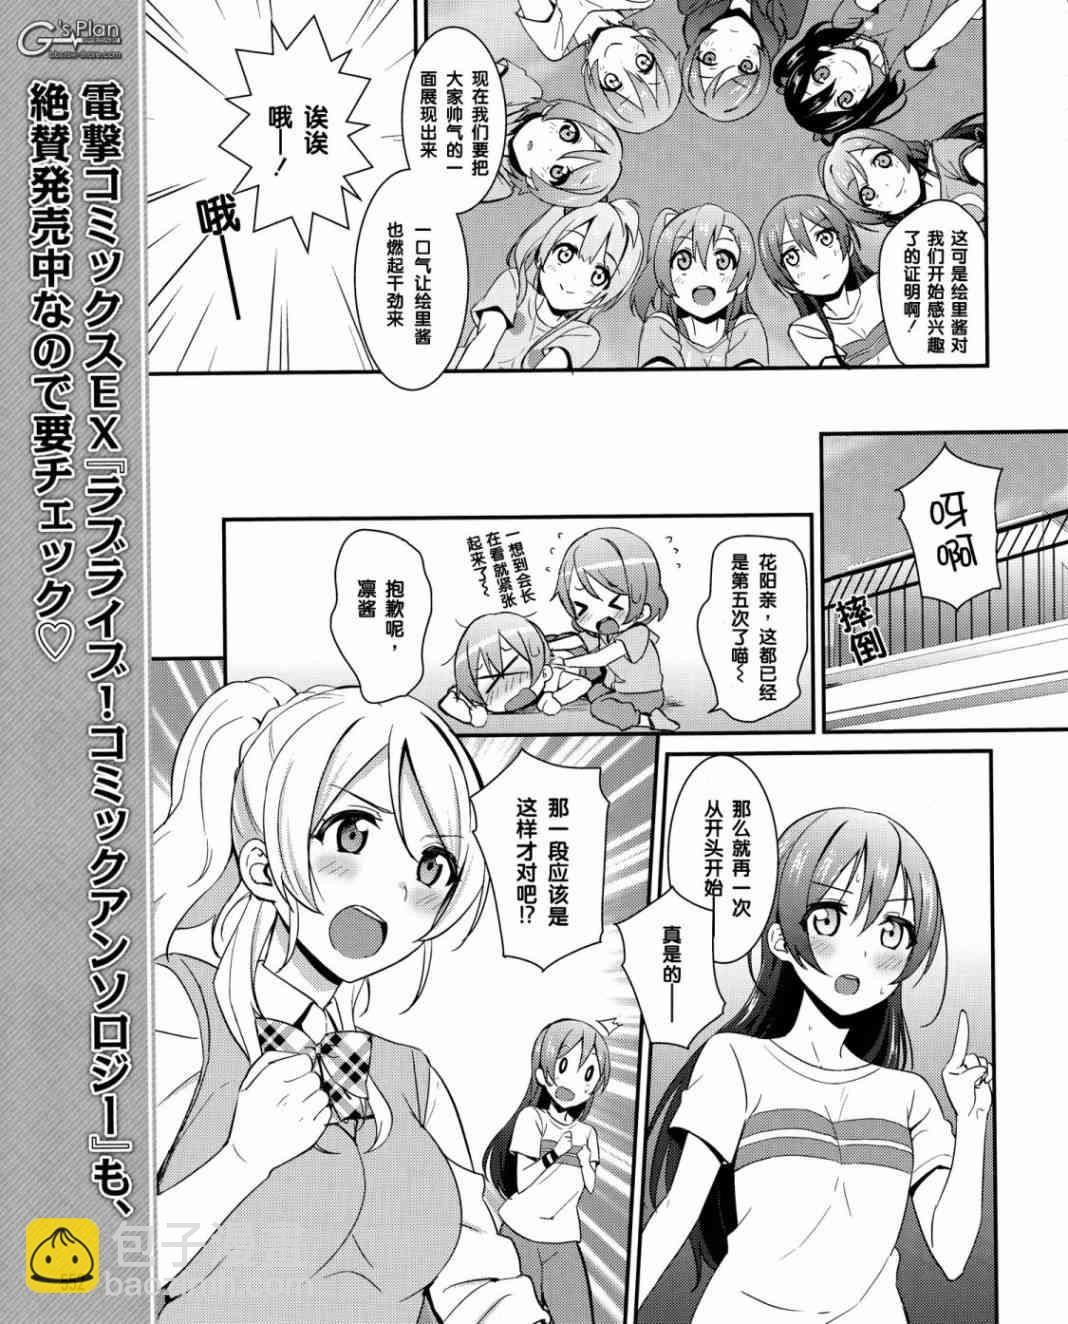 LoveLive - 19話 - 4